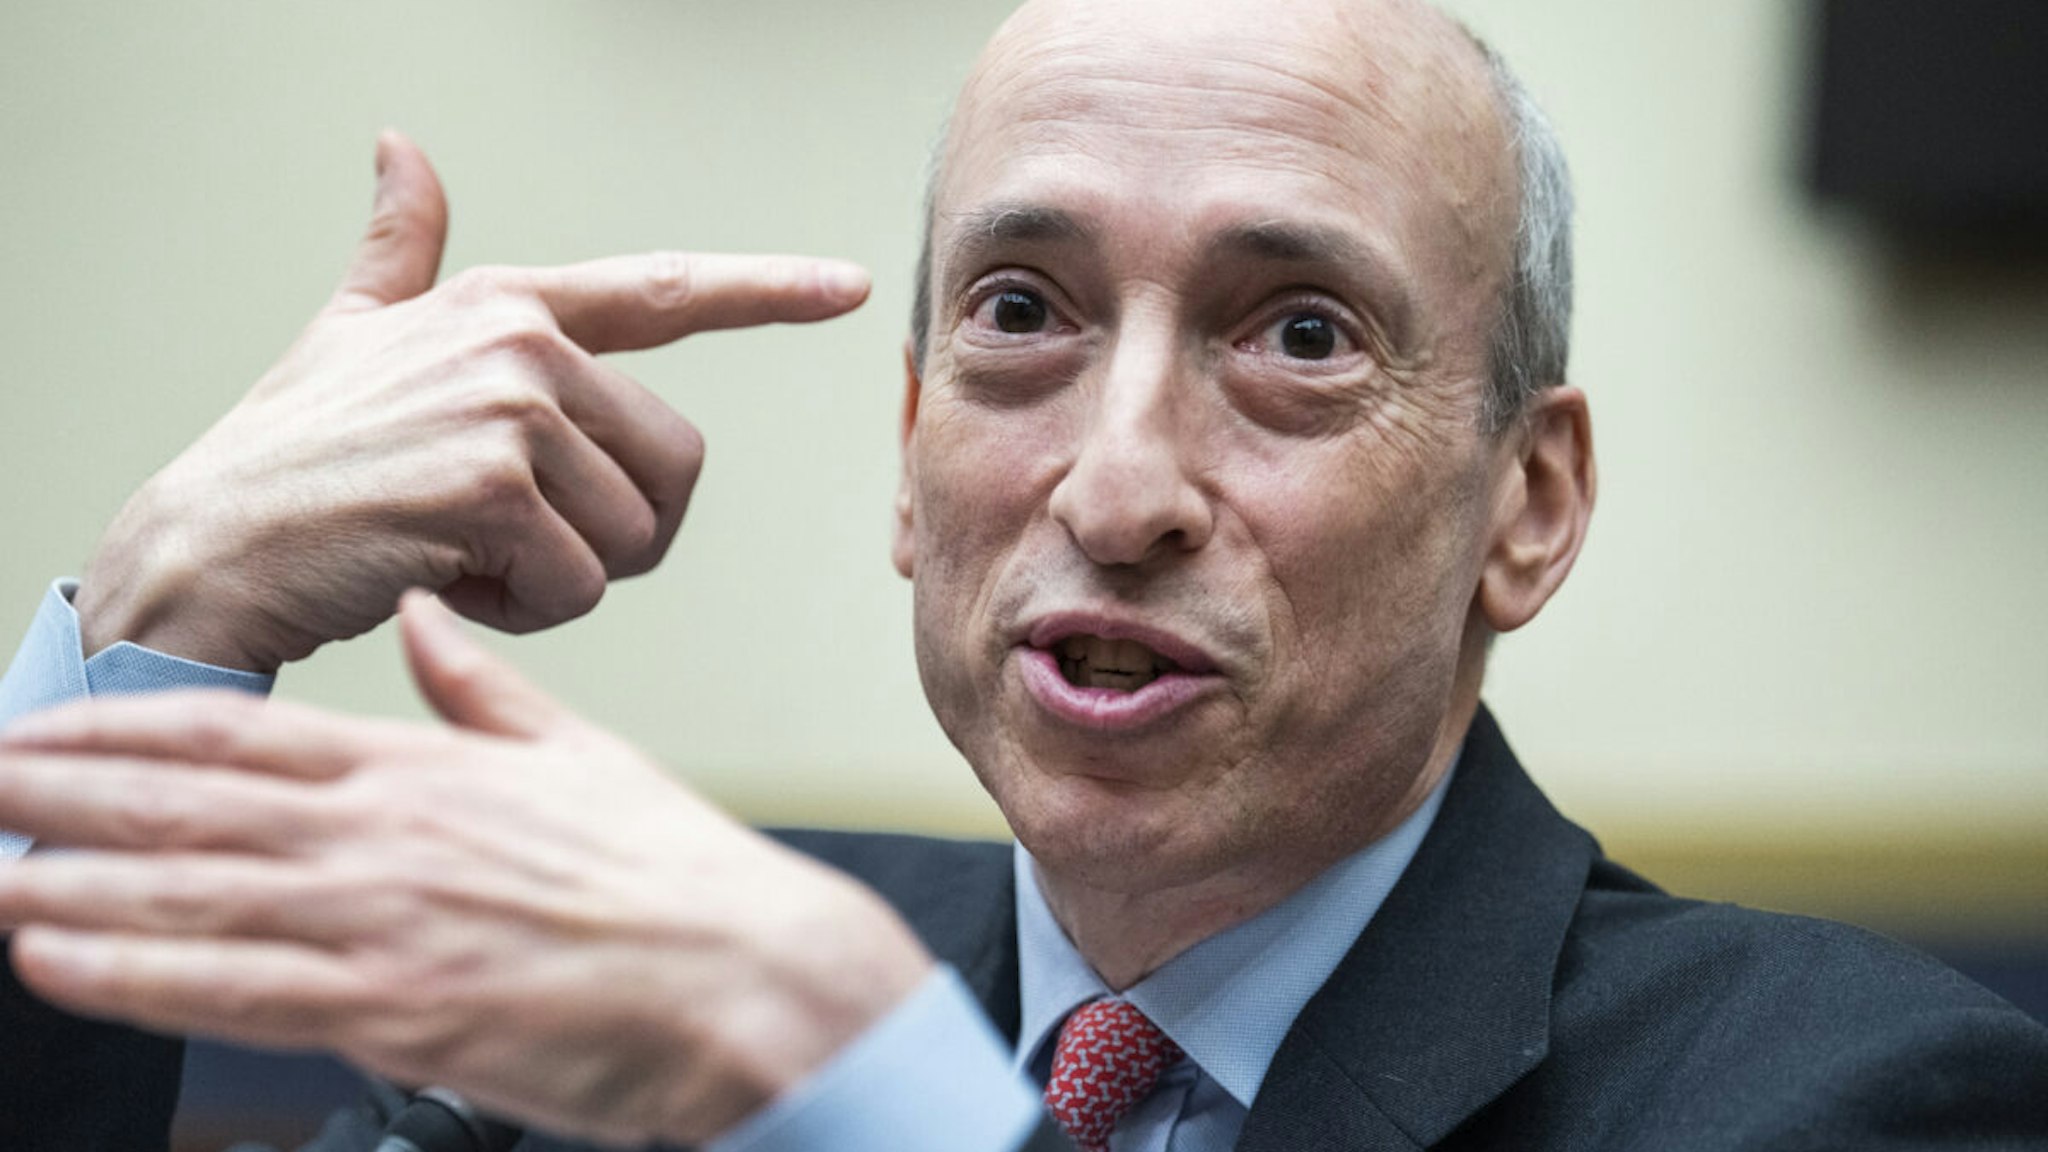 SEC Chair Gary Gensler mocks putting a gun to his head in response to a "Blazing Saddles" reference by Rep. Emanuel Cleaver, D-Mo., during the House Financial Services Committee hearing titled "Oversight of the Securities and Exchange Commission," in Rayburn Building on Tuesday, April 18, 2023.